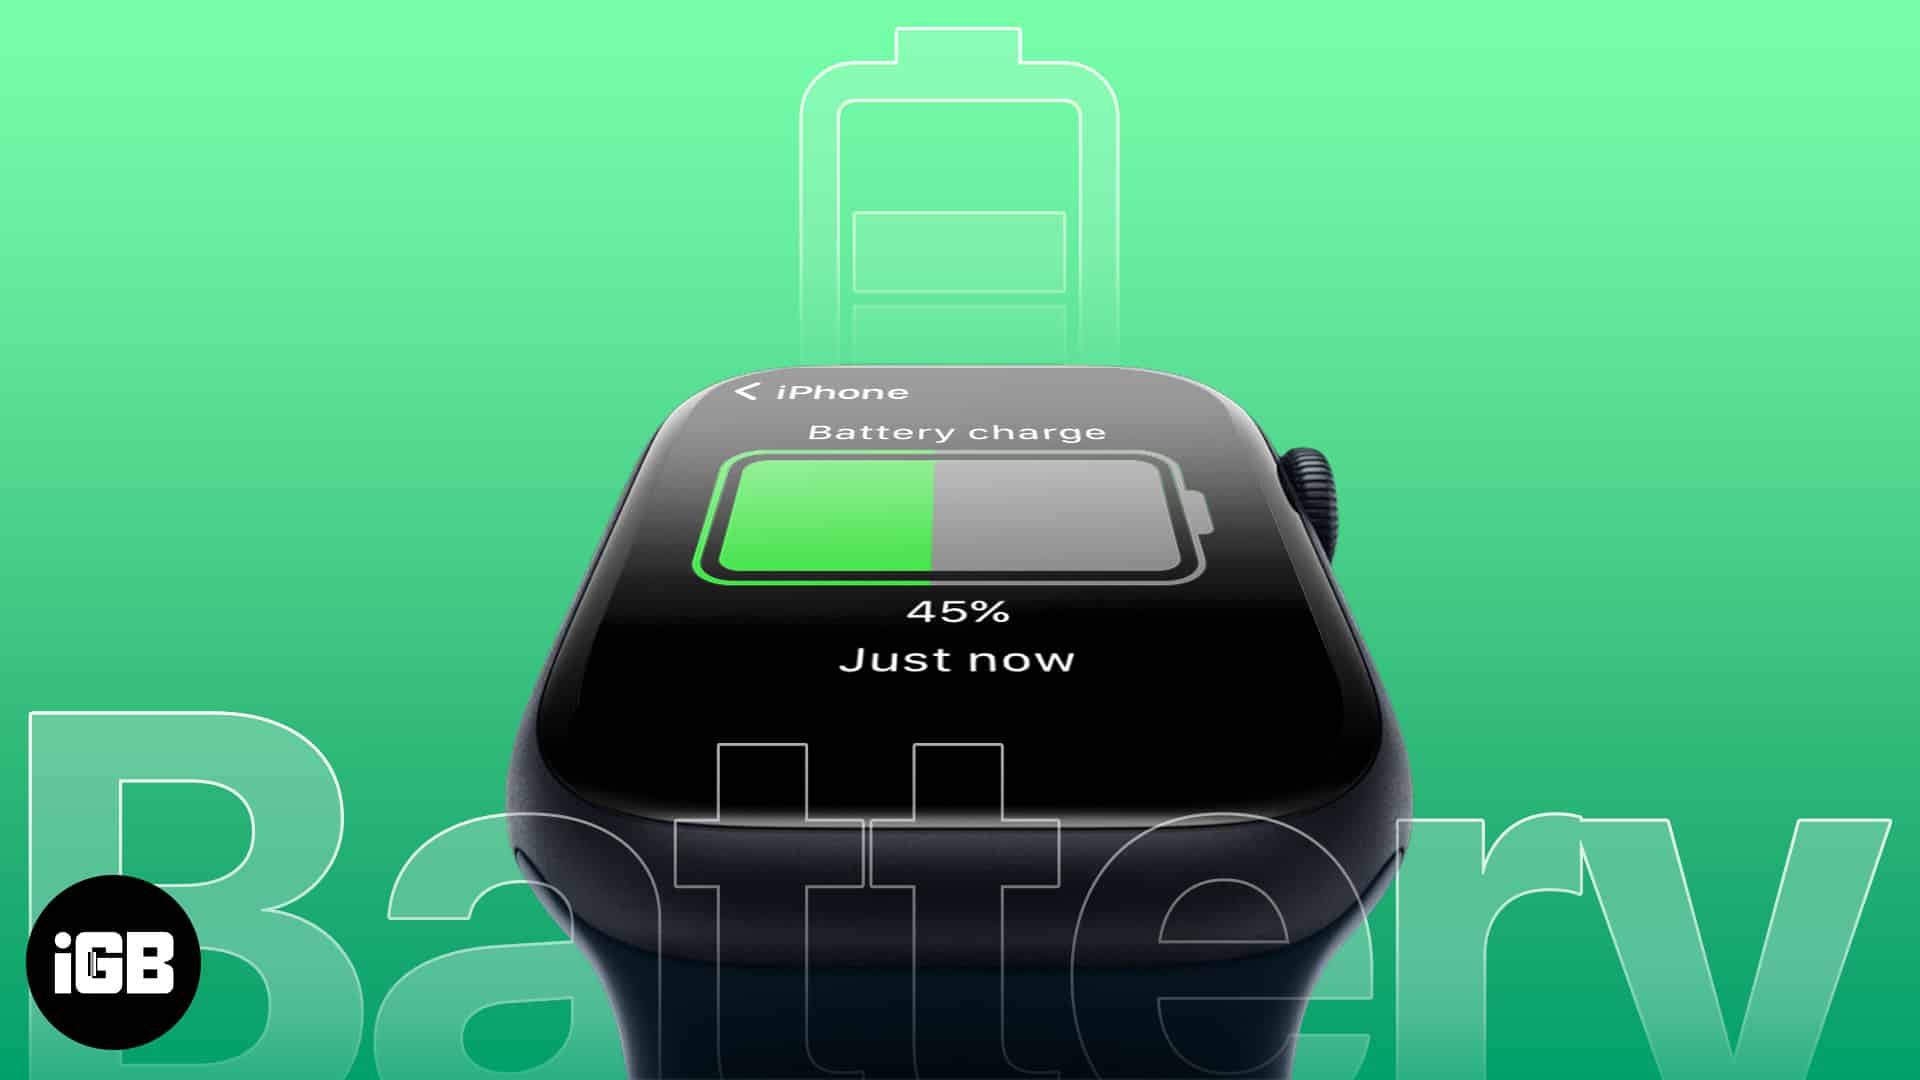 How to check iPhone battery percentage on Apple Watch